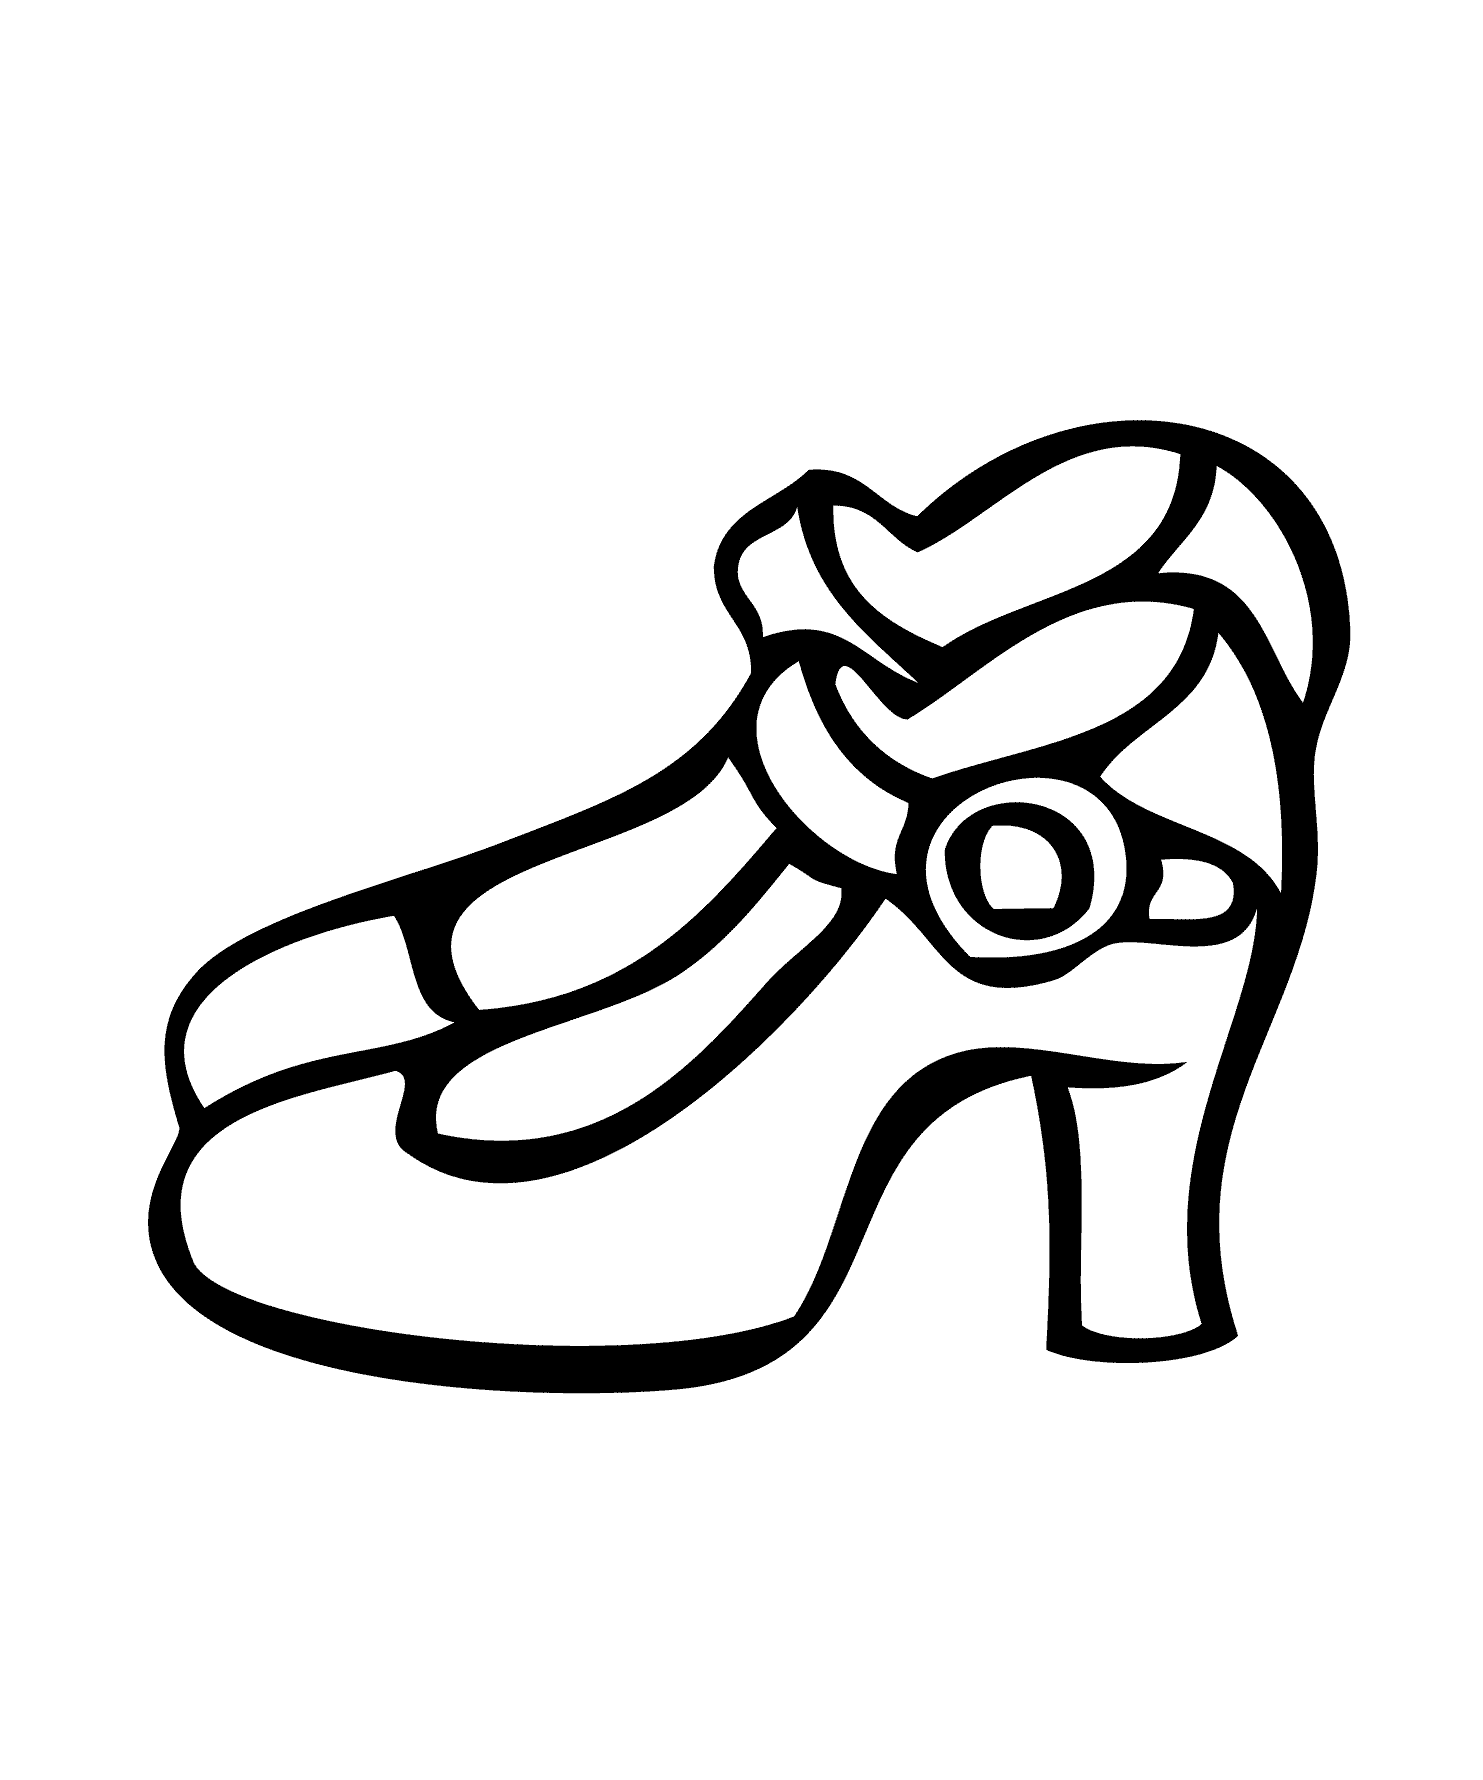 Shoe coloring pages to download and print for free